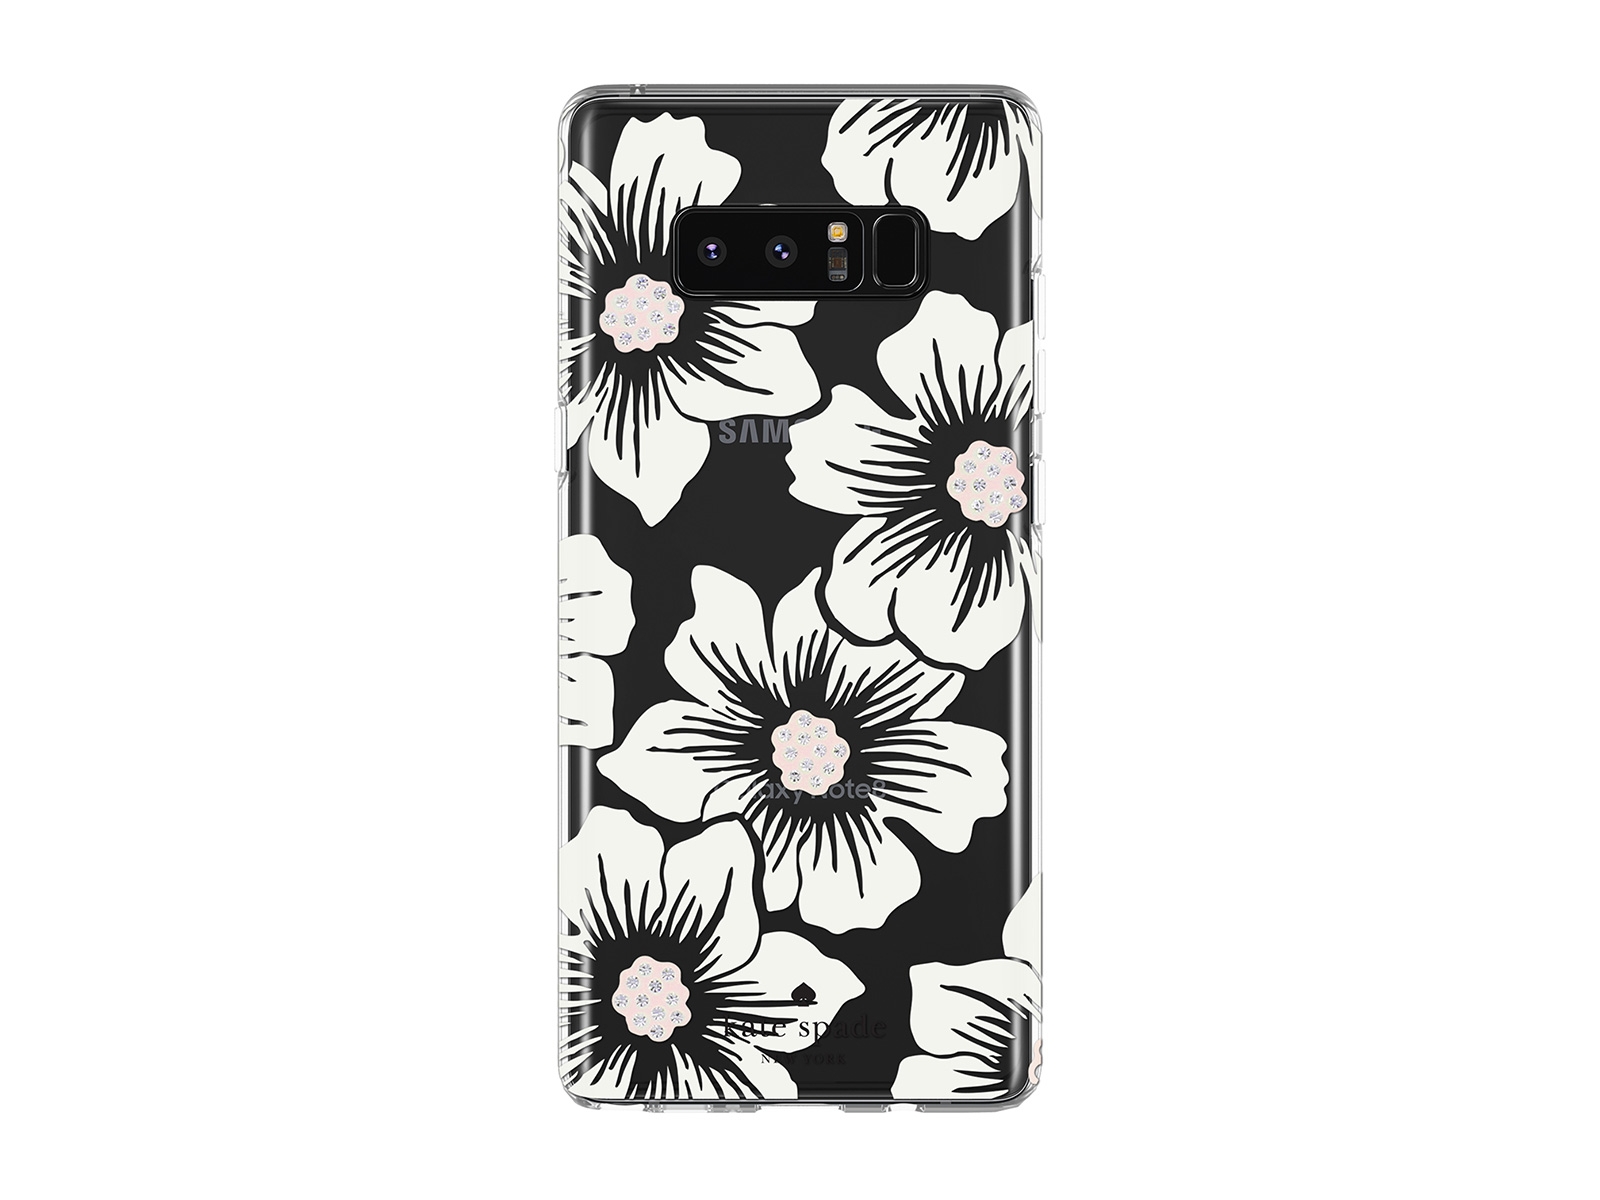 kate spade Flexible Hardshell Case for Note8, Hollyhock Floral Mobile  Accessories - KSSA-037-HHCCS | Samsung US